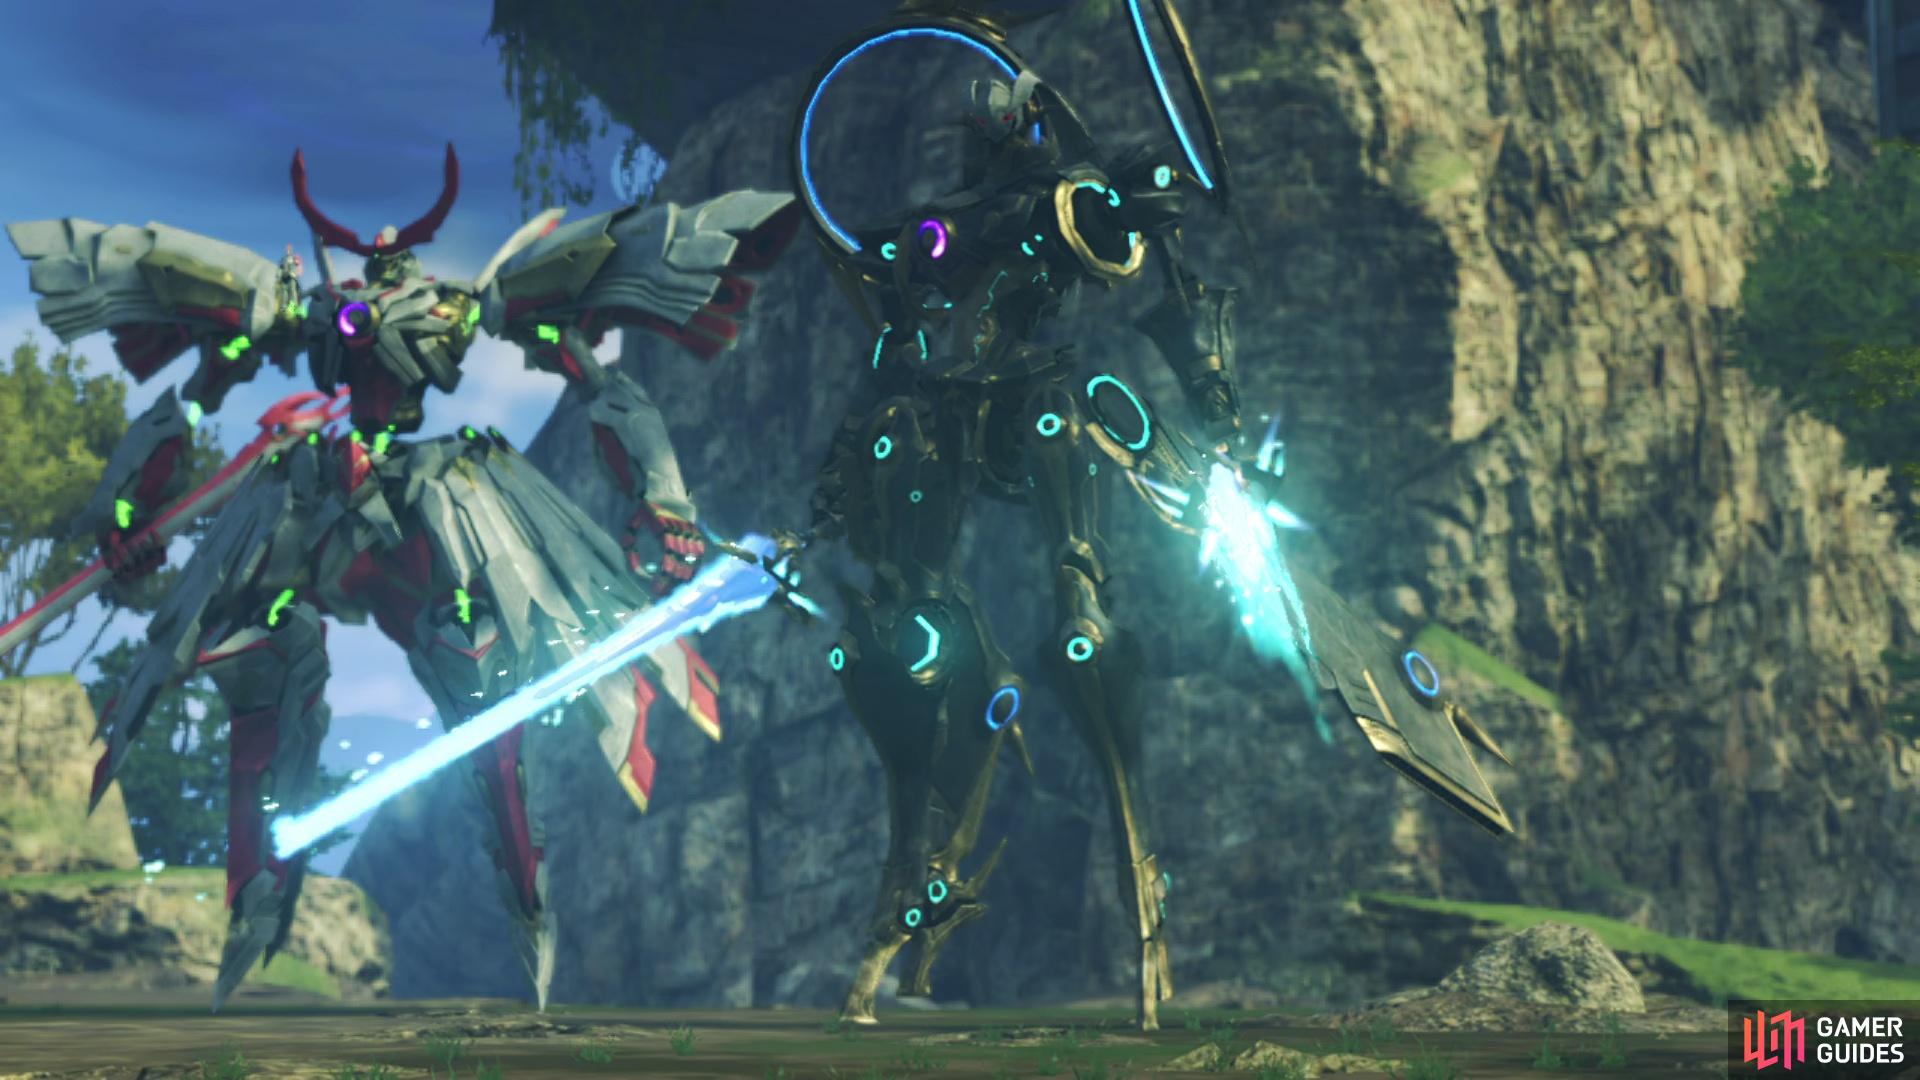 Ethel and Cammuravis Ferronises are a boss battle in Chapter 4 of Xenoblade Chronicles 3.